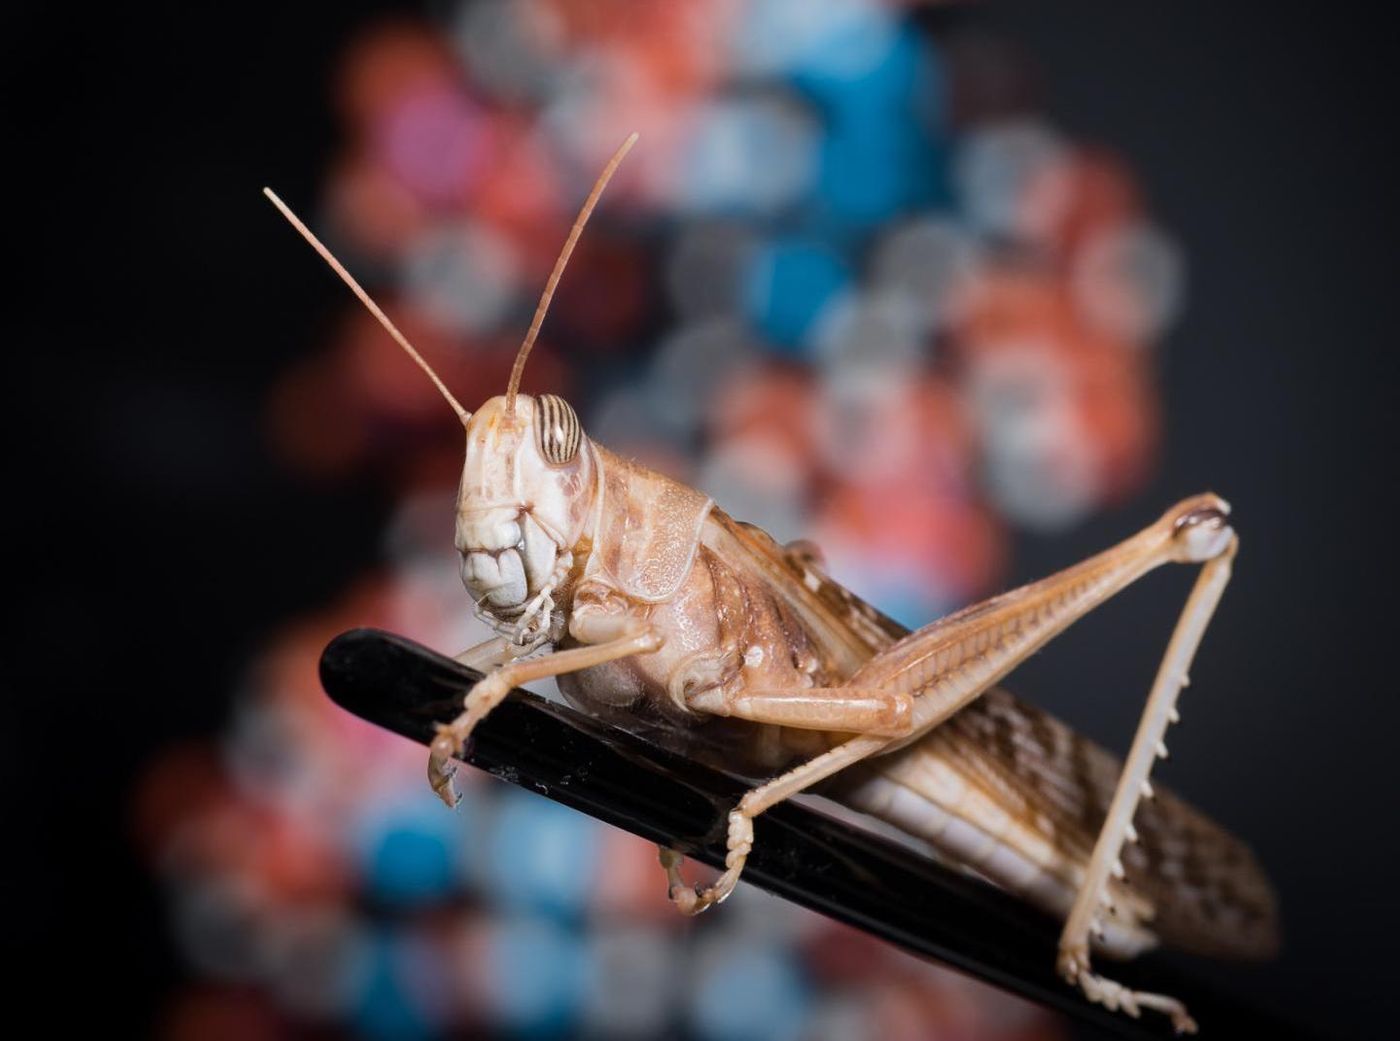 In between swarm outbreaks, desert locusts lead solitary lives that behave much like a harmless grasshopper. / Credit: University of Leicester